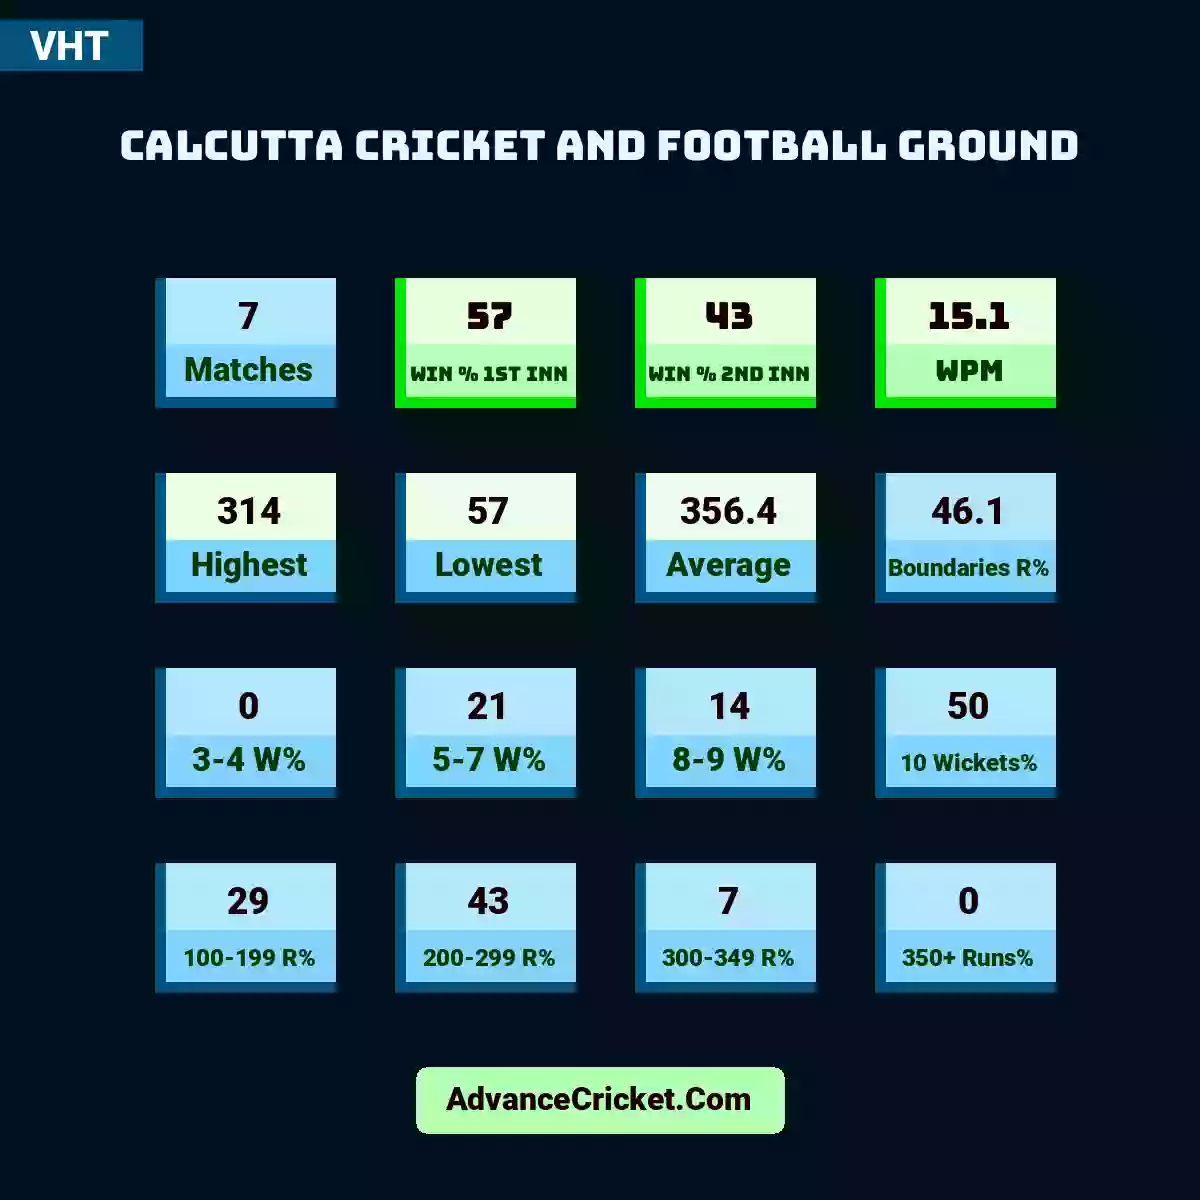 Image showing Calcutta Cricket and Football Ground with Matches: 7, Win % 1st Inn: 57, Win % 2nd Inn: 43, WPM: 15.1, Highest: 314, Lowest: 57, Average: 356.4, Boundaries R%: 46.1, 3-4 W%: 0, 5-7 W%: 21, 8-9 W%: 14, 10 Wickets%: 50, 100-199 R%: 29, 200-299 R%: 43, 300-349 R%: 7, 350+ Runs%: 0.